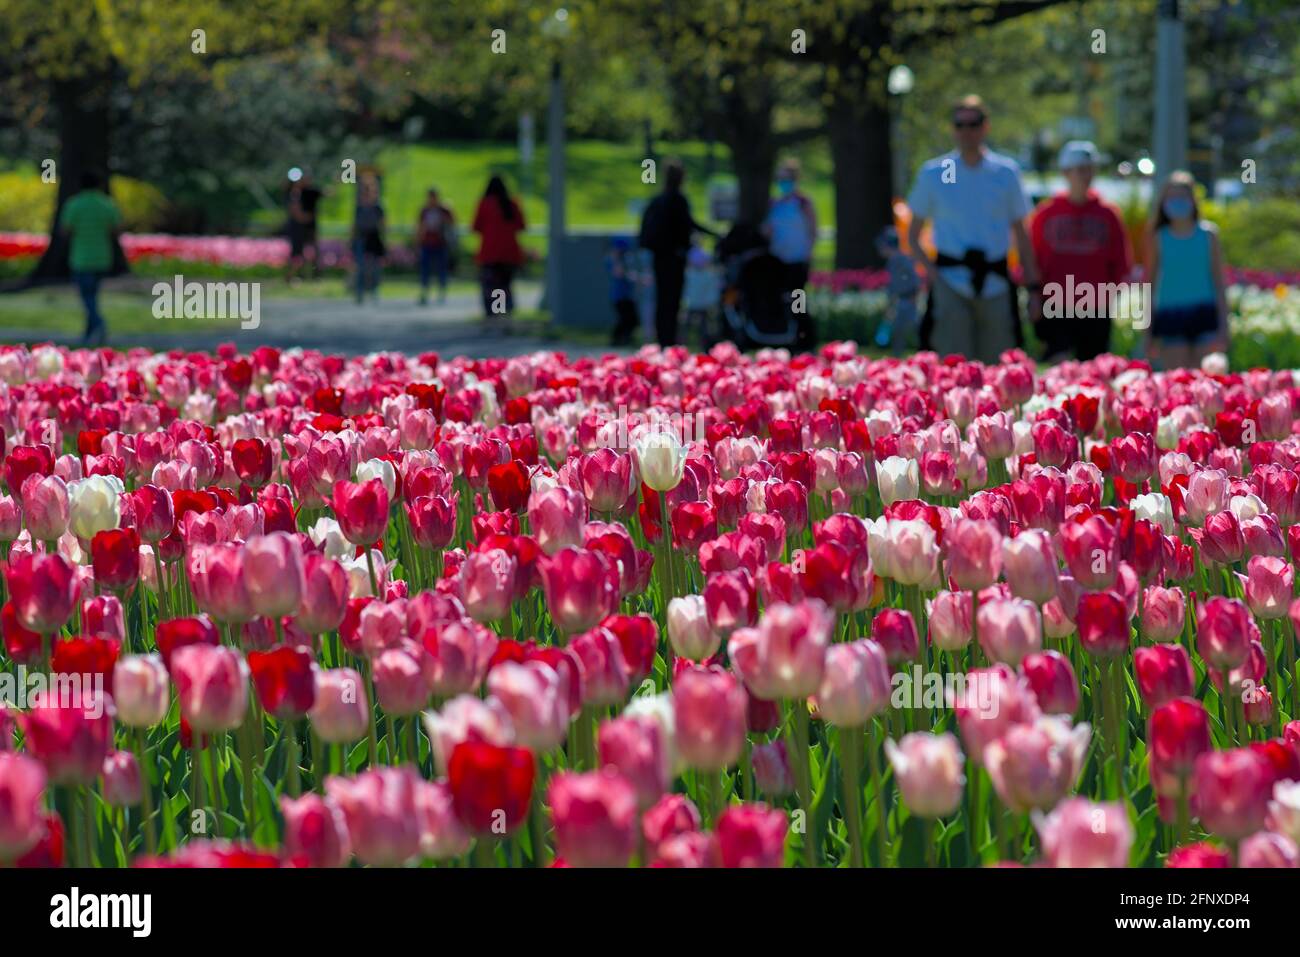 Smaller COVID crowds lapping up the tulips (National Velvet, Hemisphere) at the Canadian Tulip Festival 2021 in Ottawa, Ontario, Canada. Stock Photo